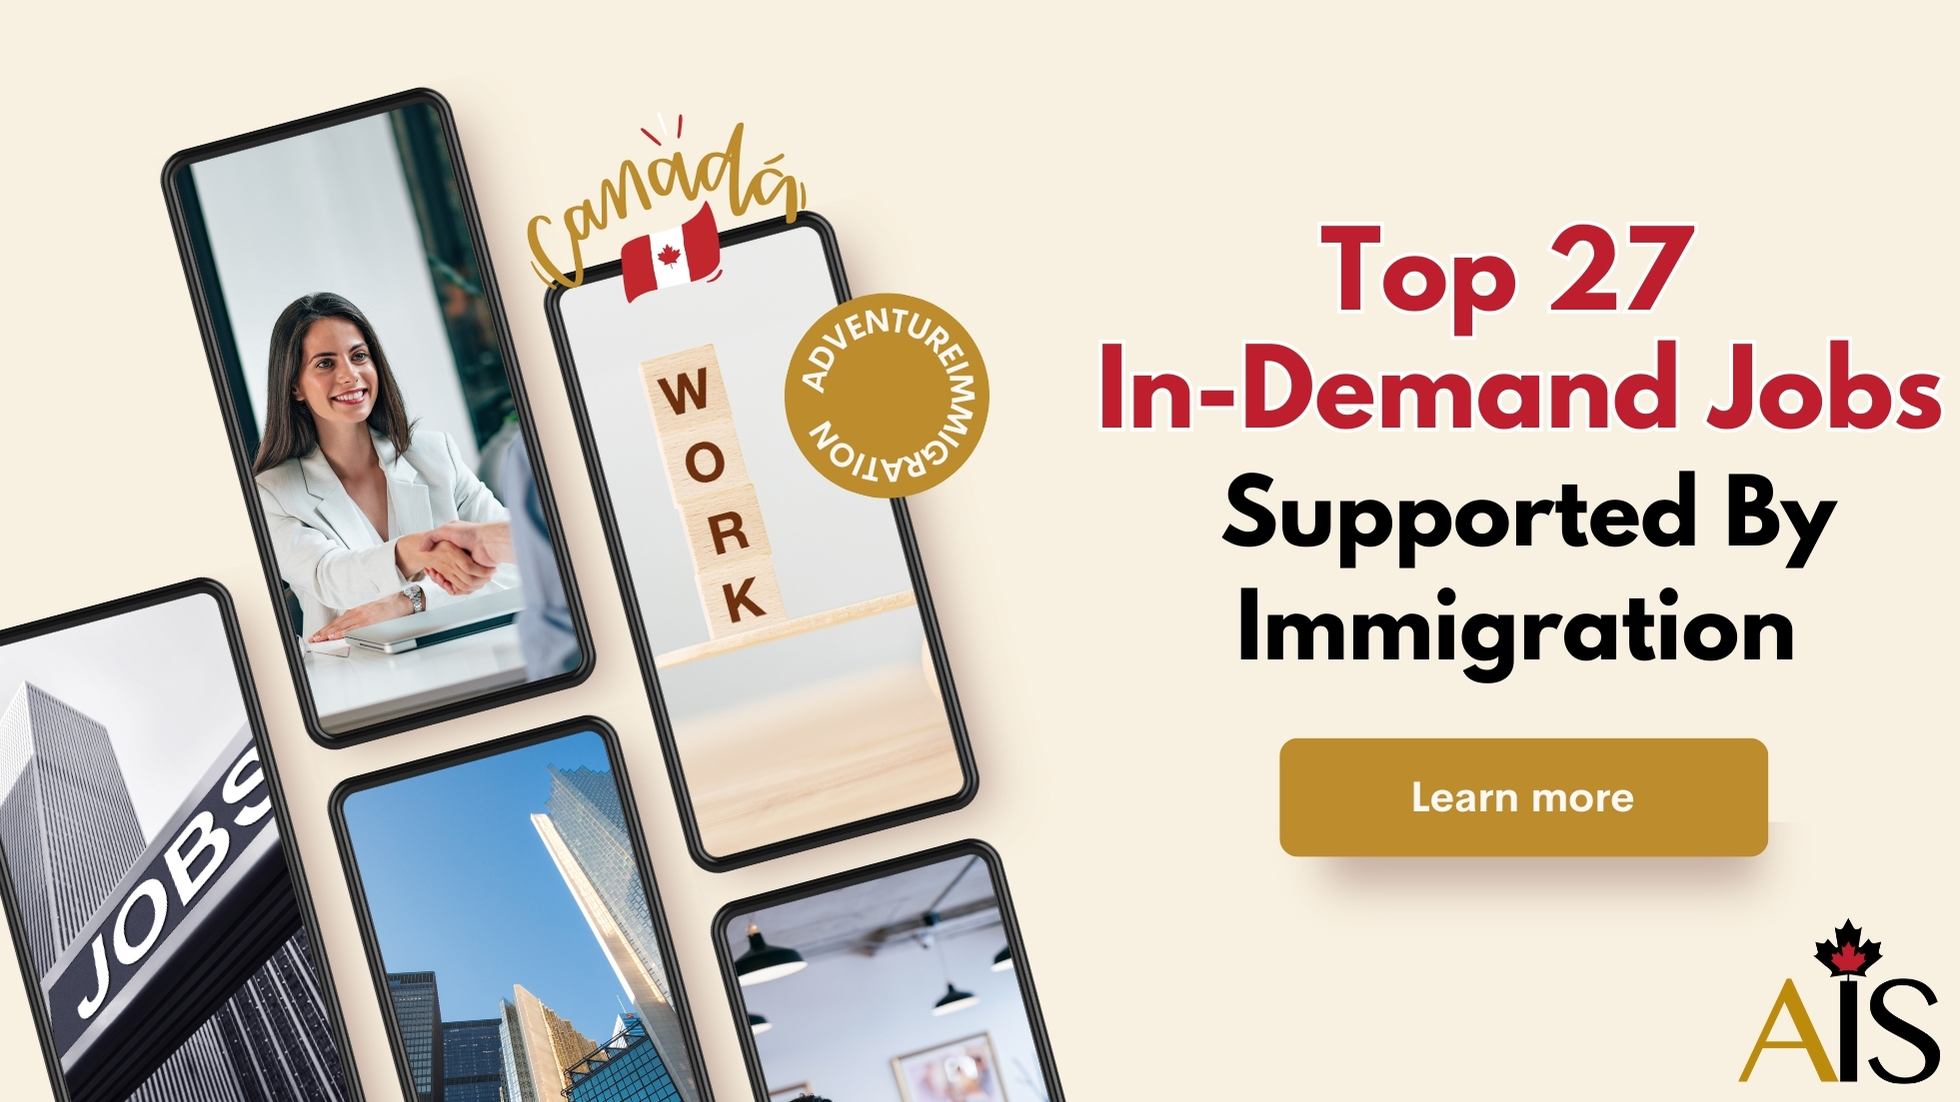 Immigration-Powered Prosperity: Canada’s Top 27 In-Demand Jobs Fueling Growth